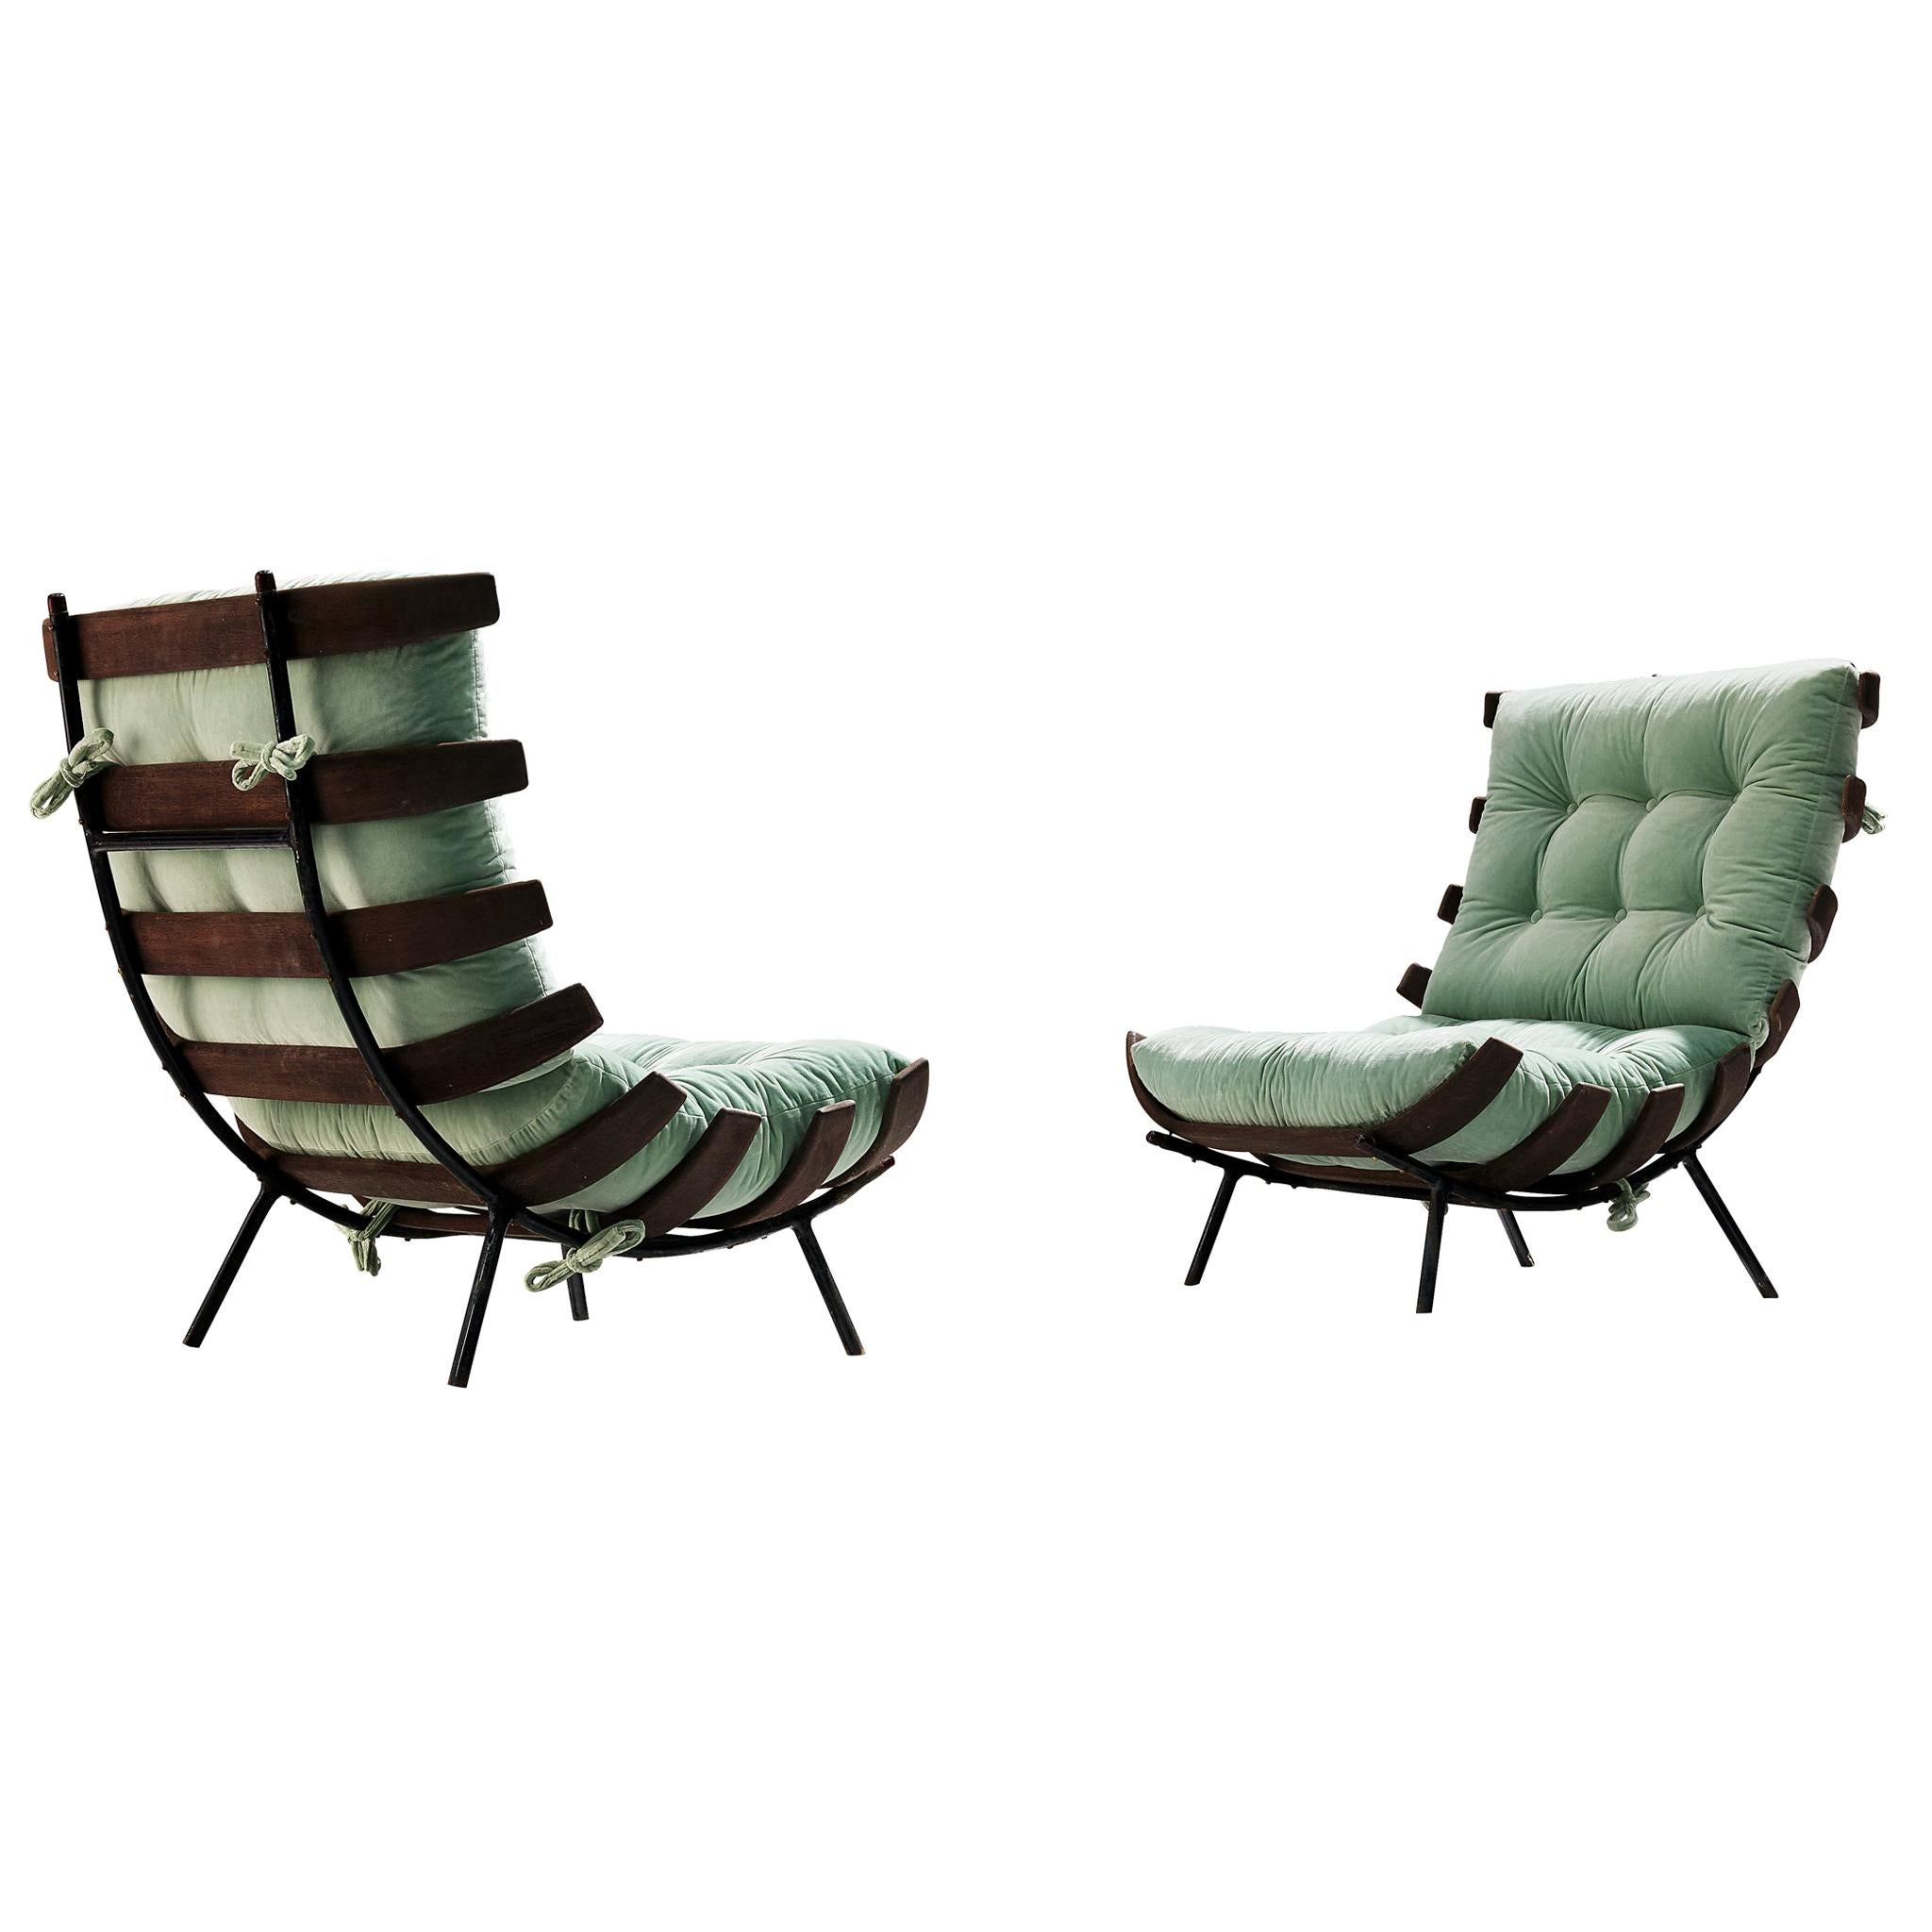 Eisler and Hauner Patinated 'Costela' Chairs